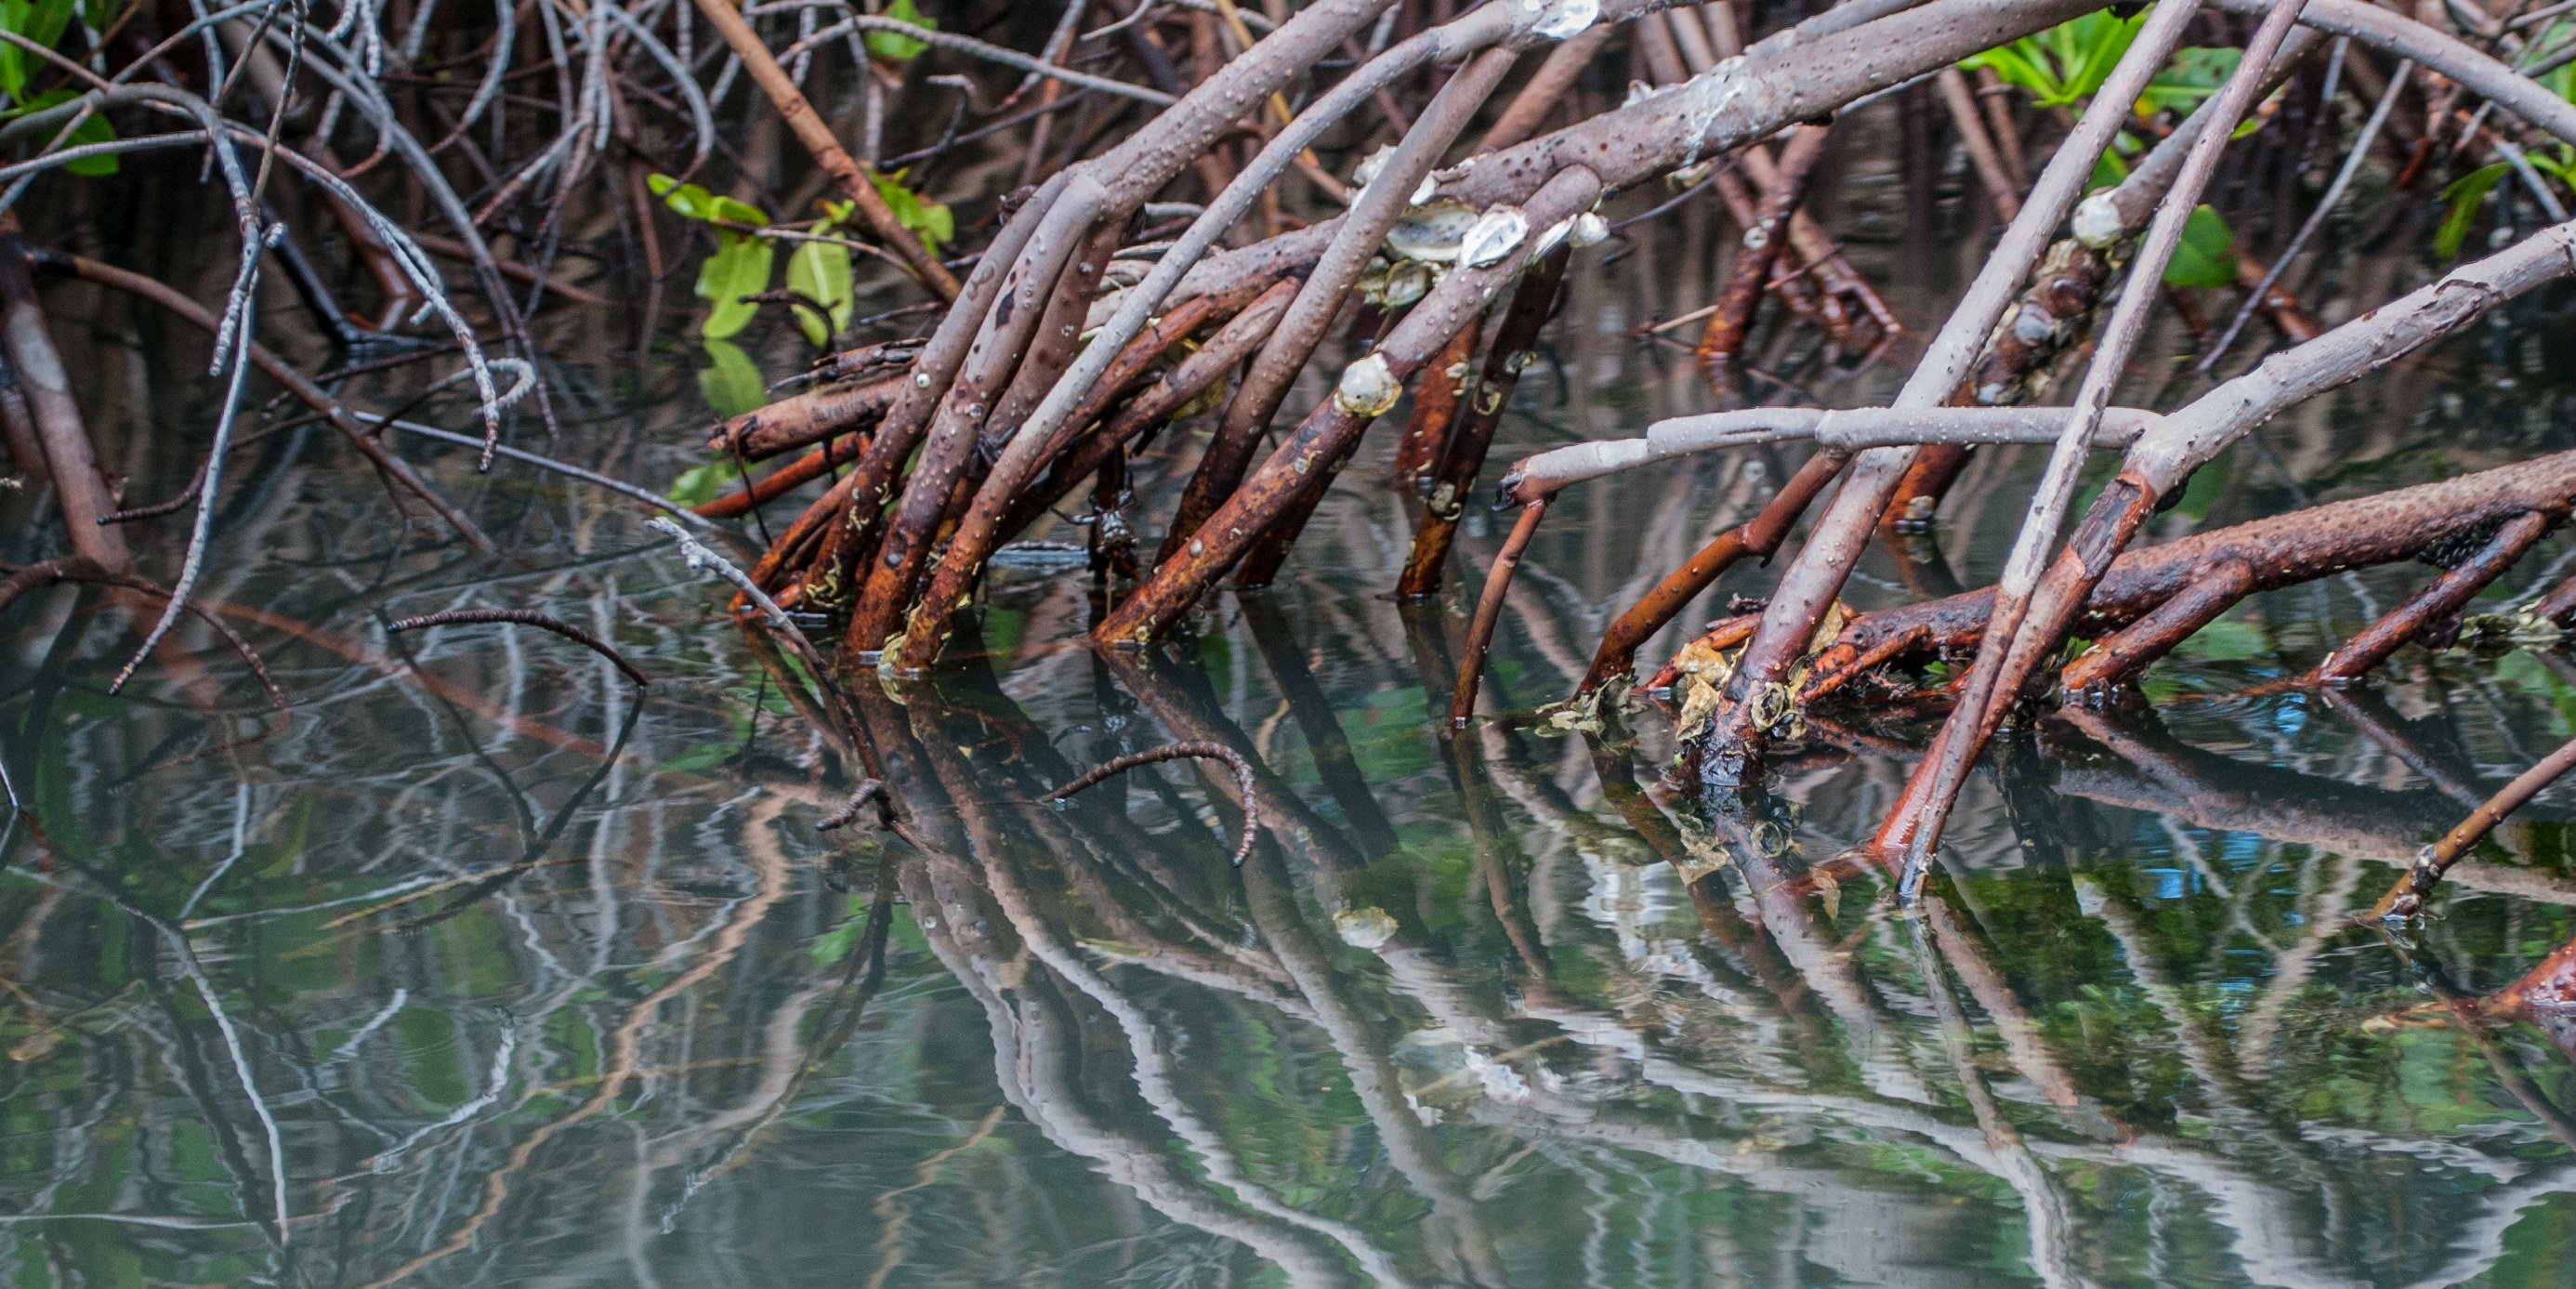 Mangrove roots are nurseries for species such as the sicklefin lemon shark. 